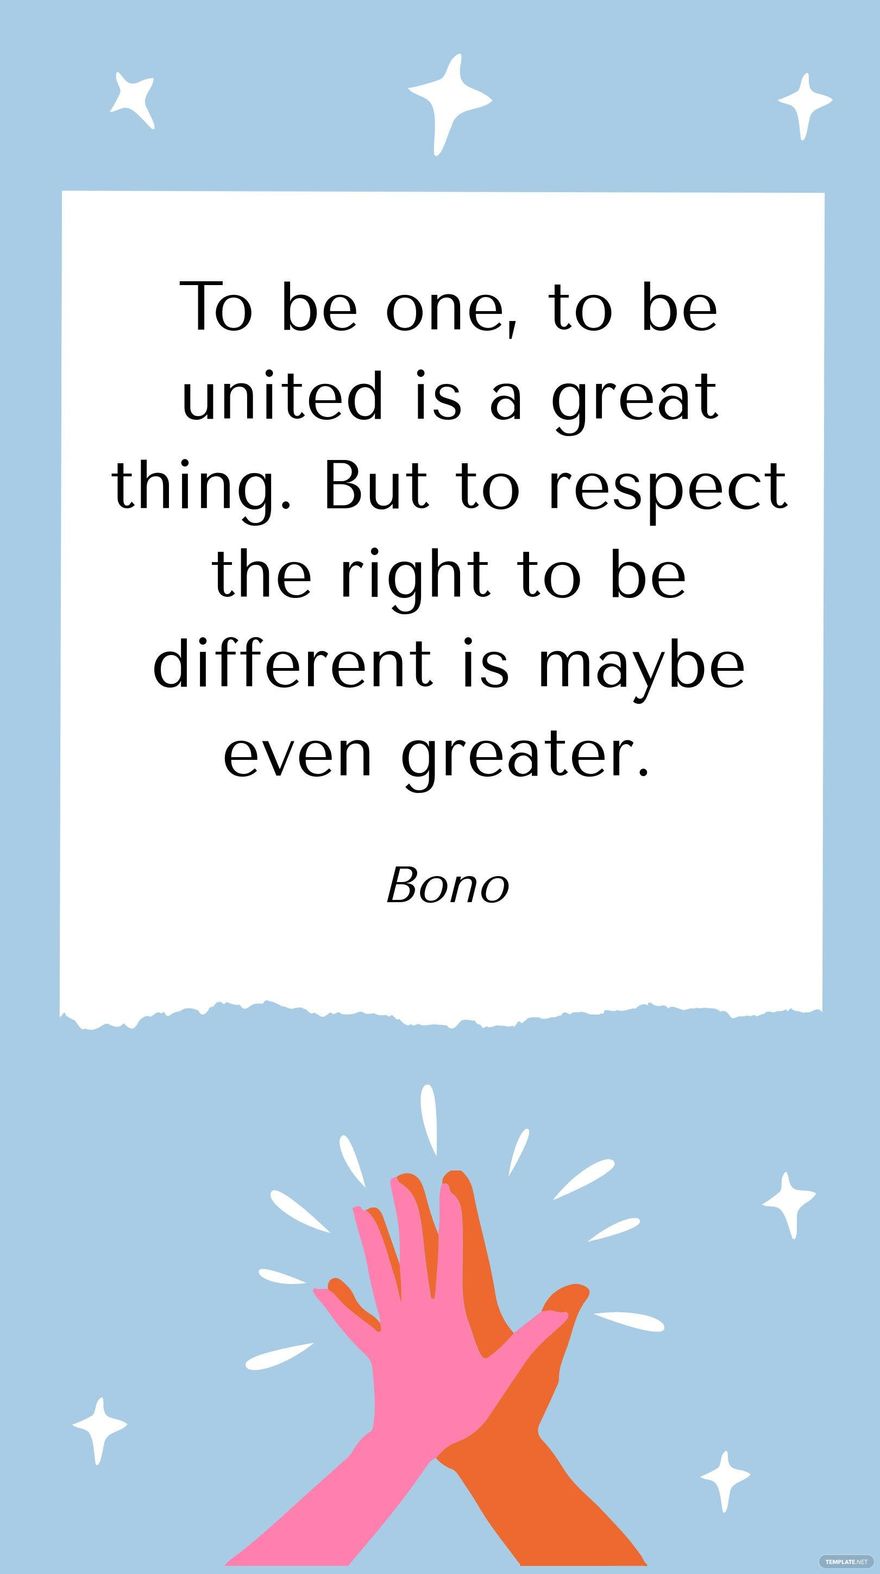 Free Bono - To be one, to be united is a great thing. But to respect the right to be different is maybe even greater. in JPG